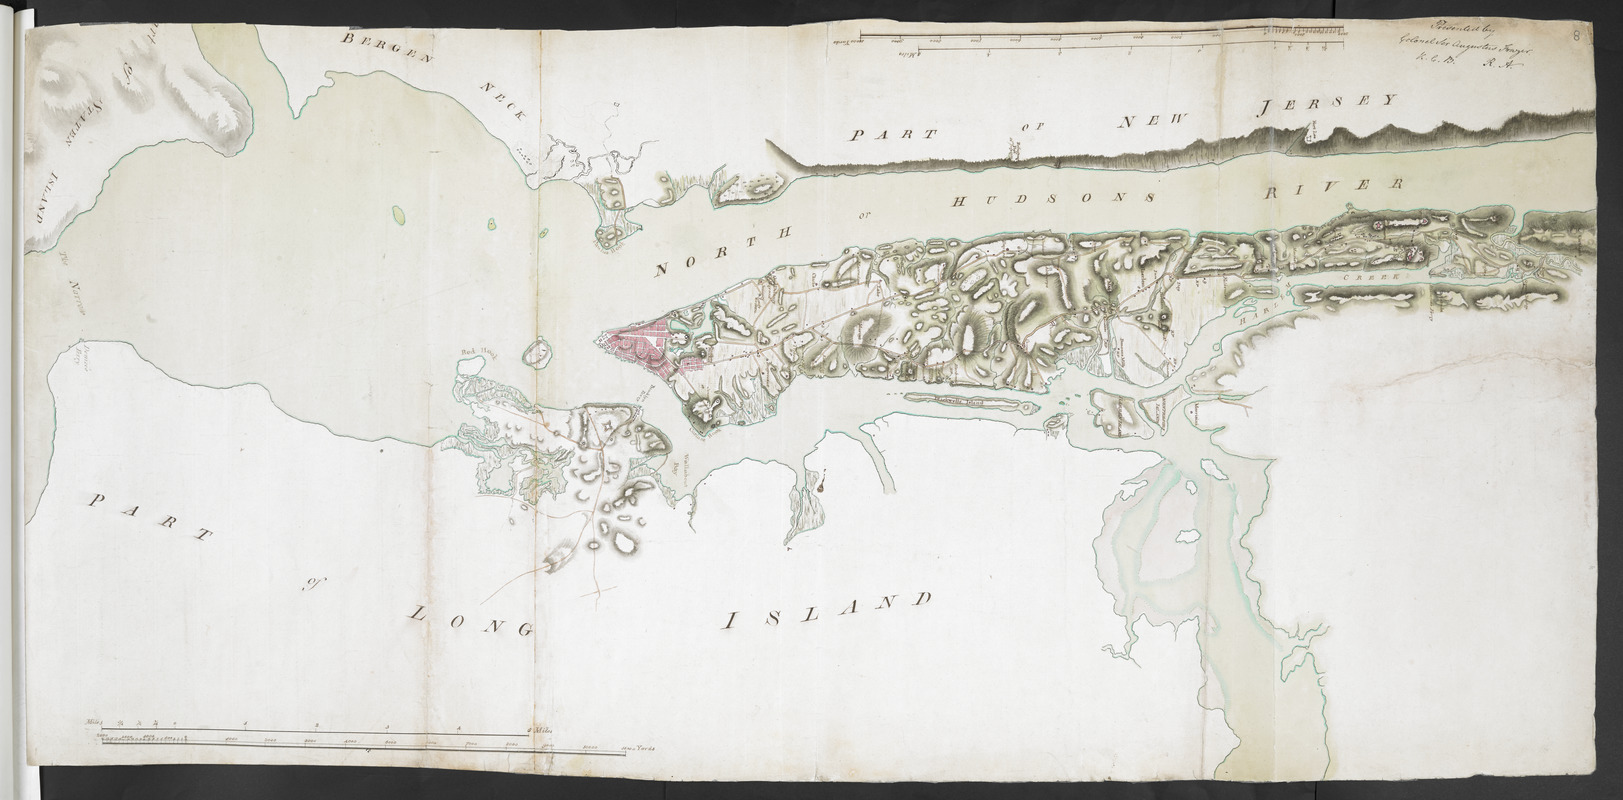 [New York Island and the Narrows. 1781]